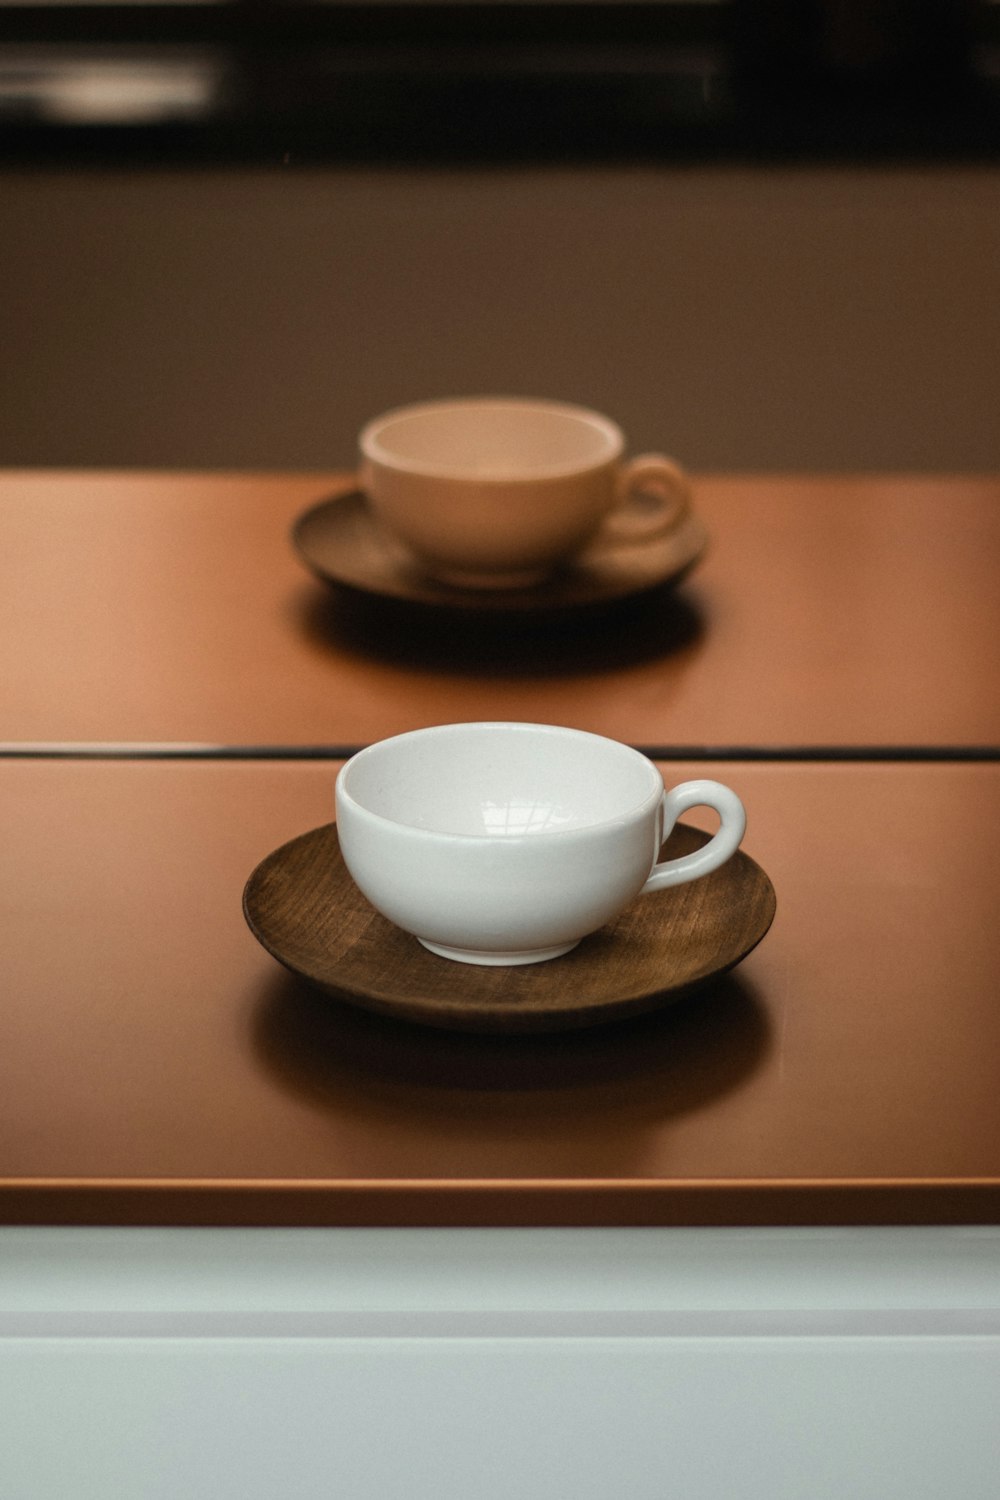 white ceramic teacup on brown wooden saucer